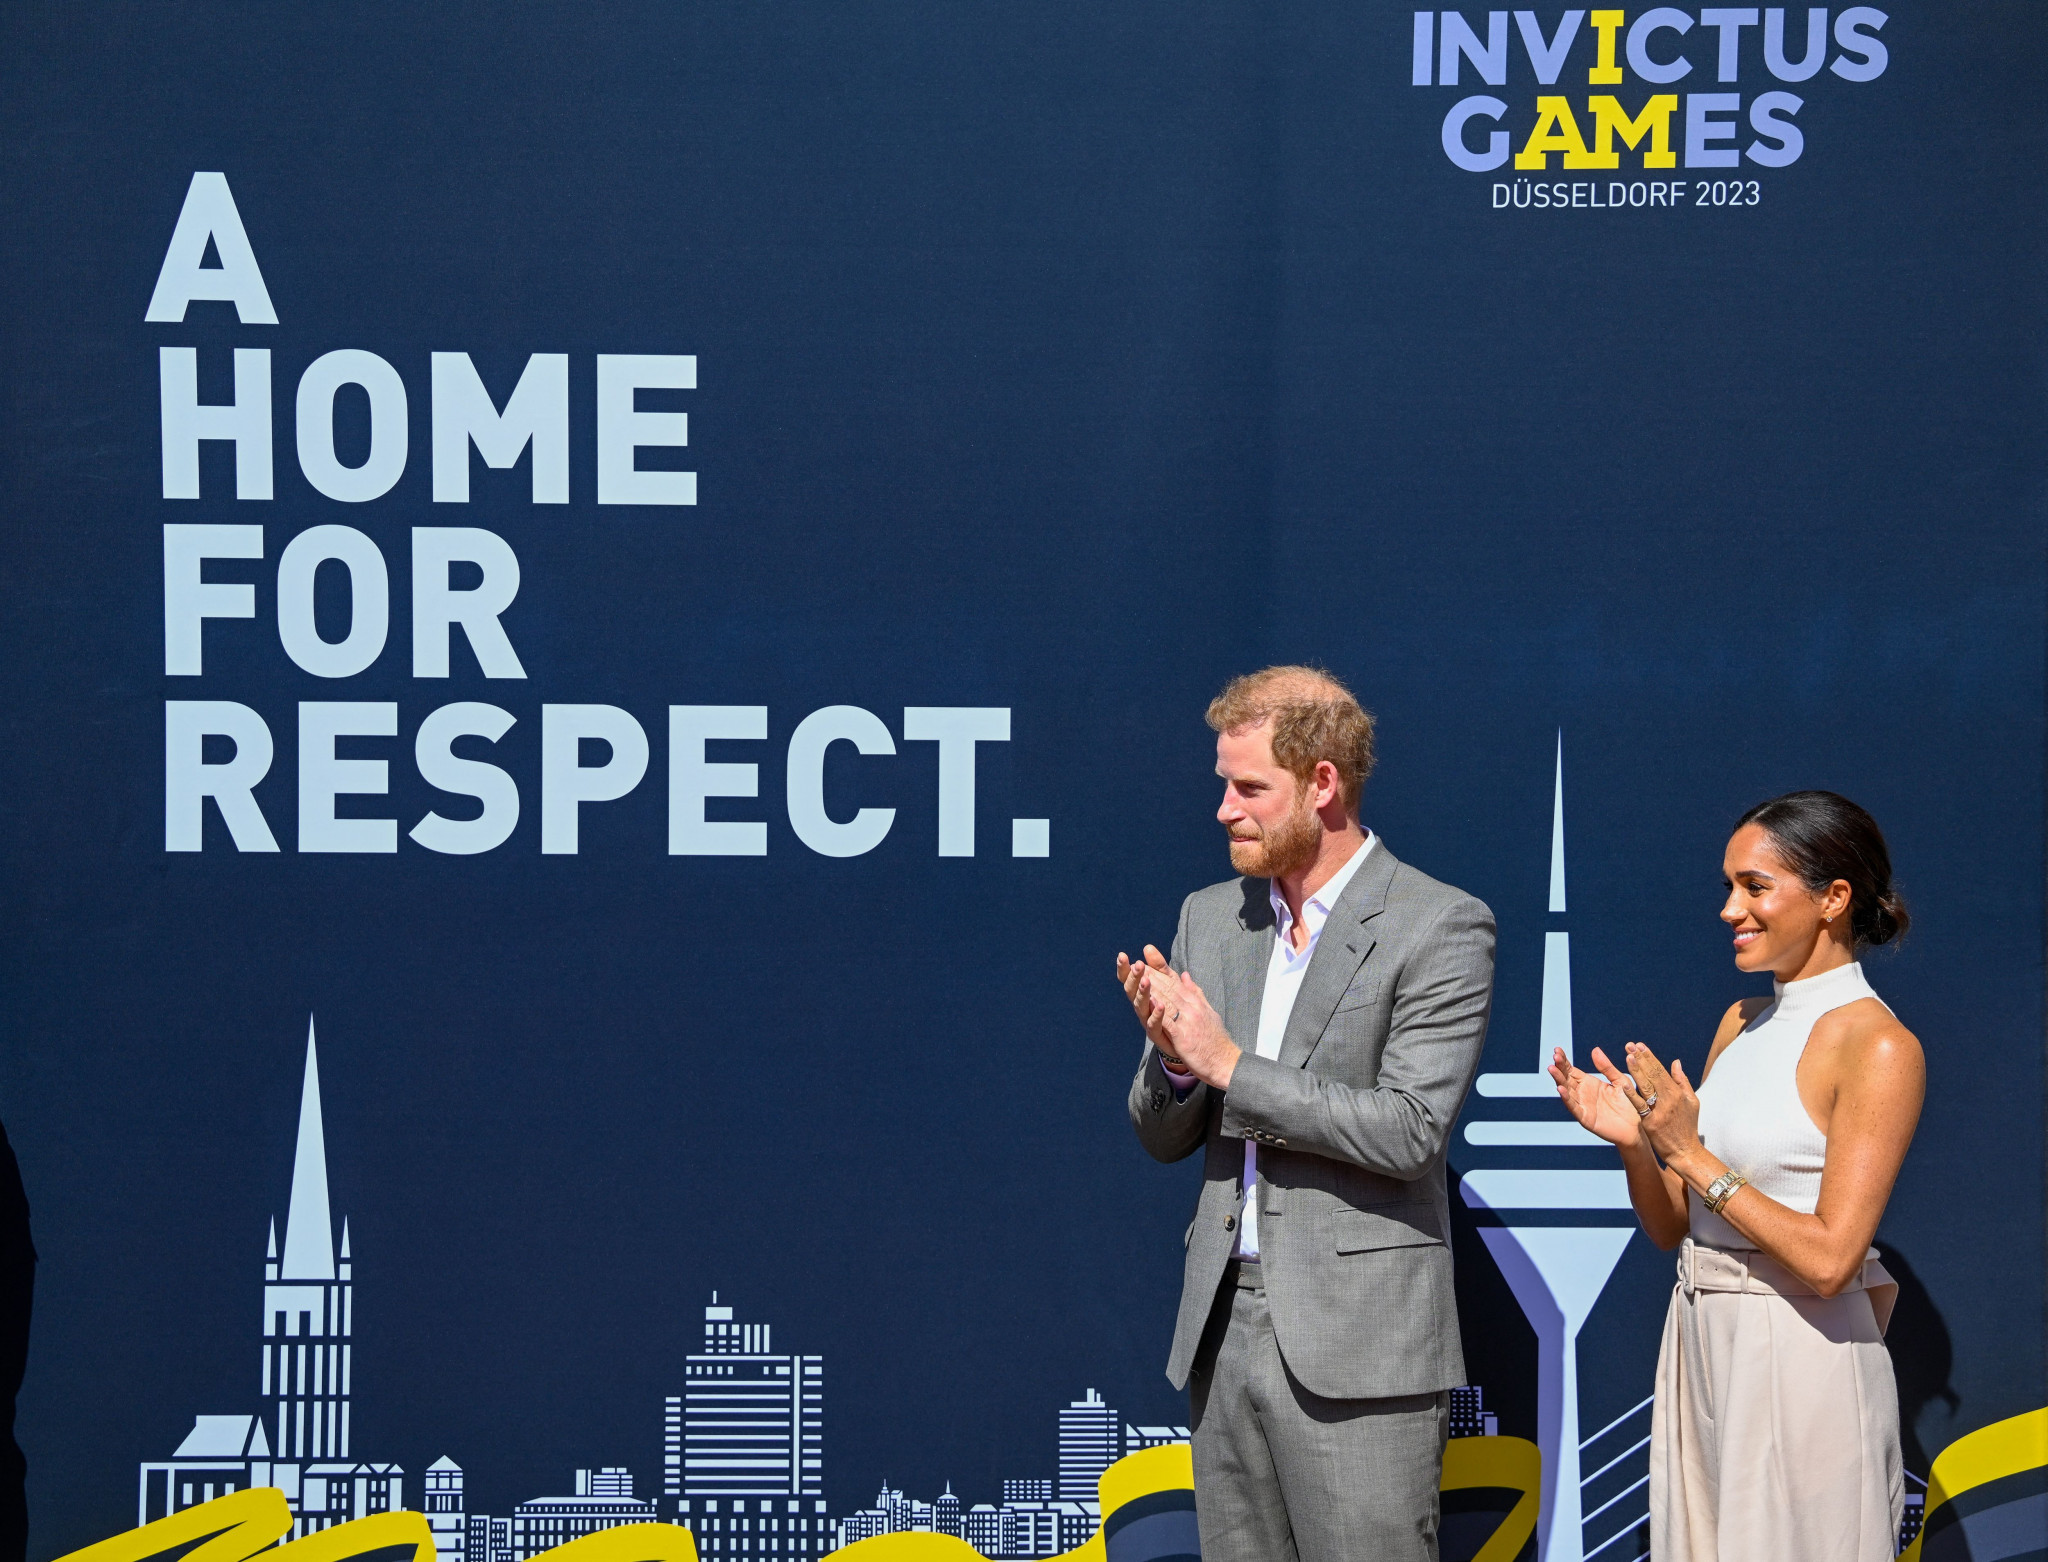 A Home for Respect has been unveiled as the motto for the 2023 Invictus Games in Düsseldorf ©Getty Images